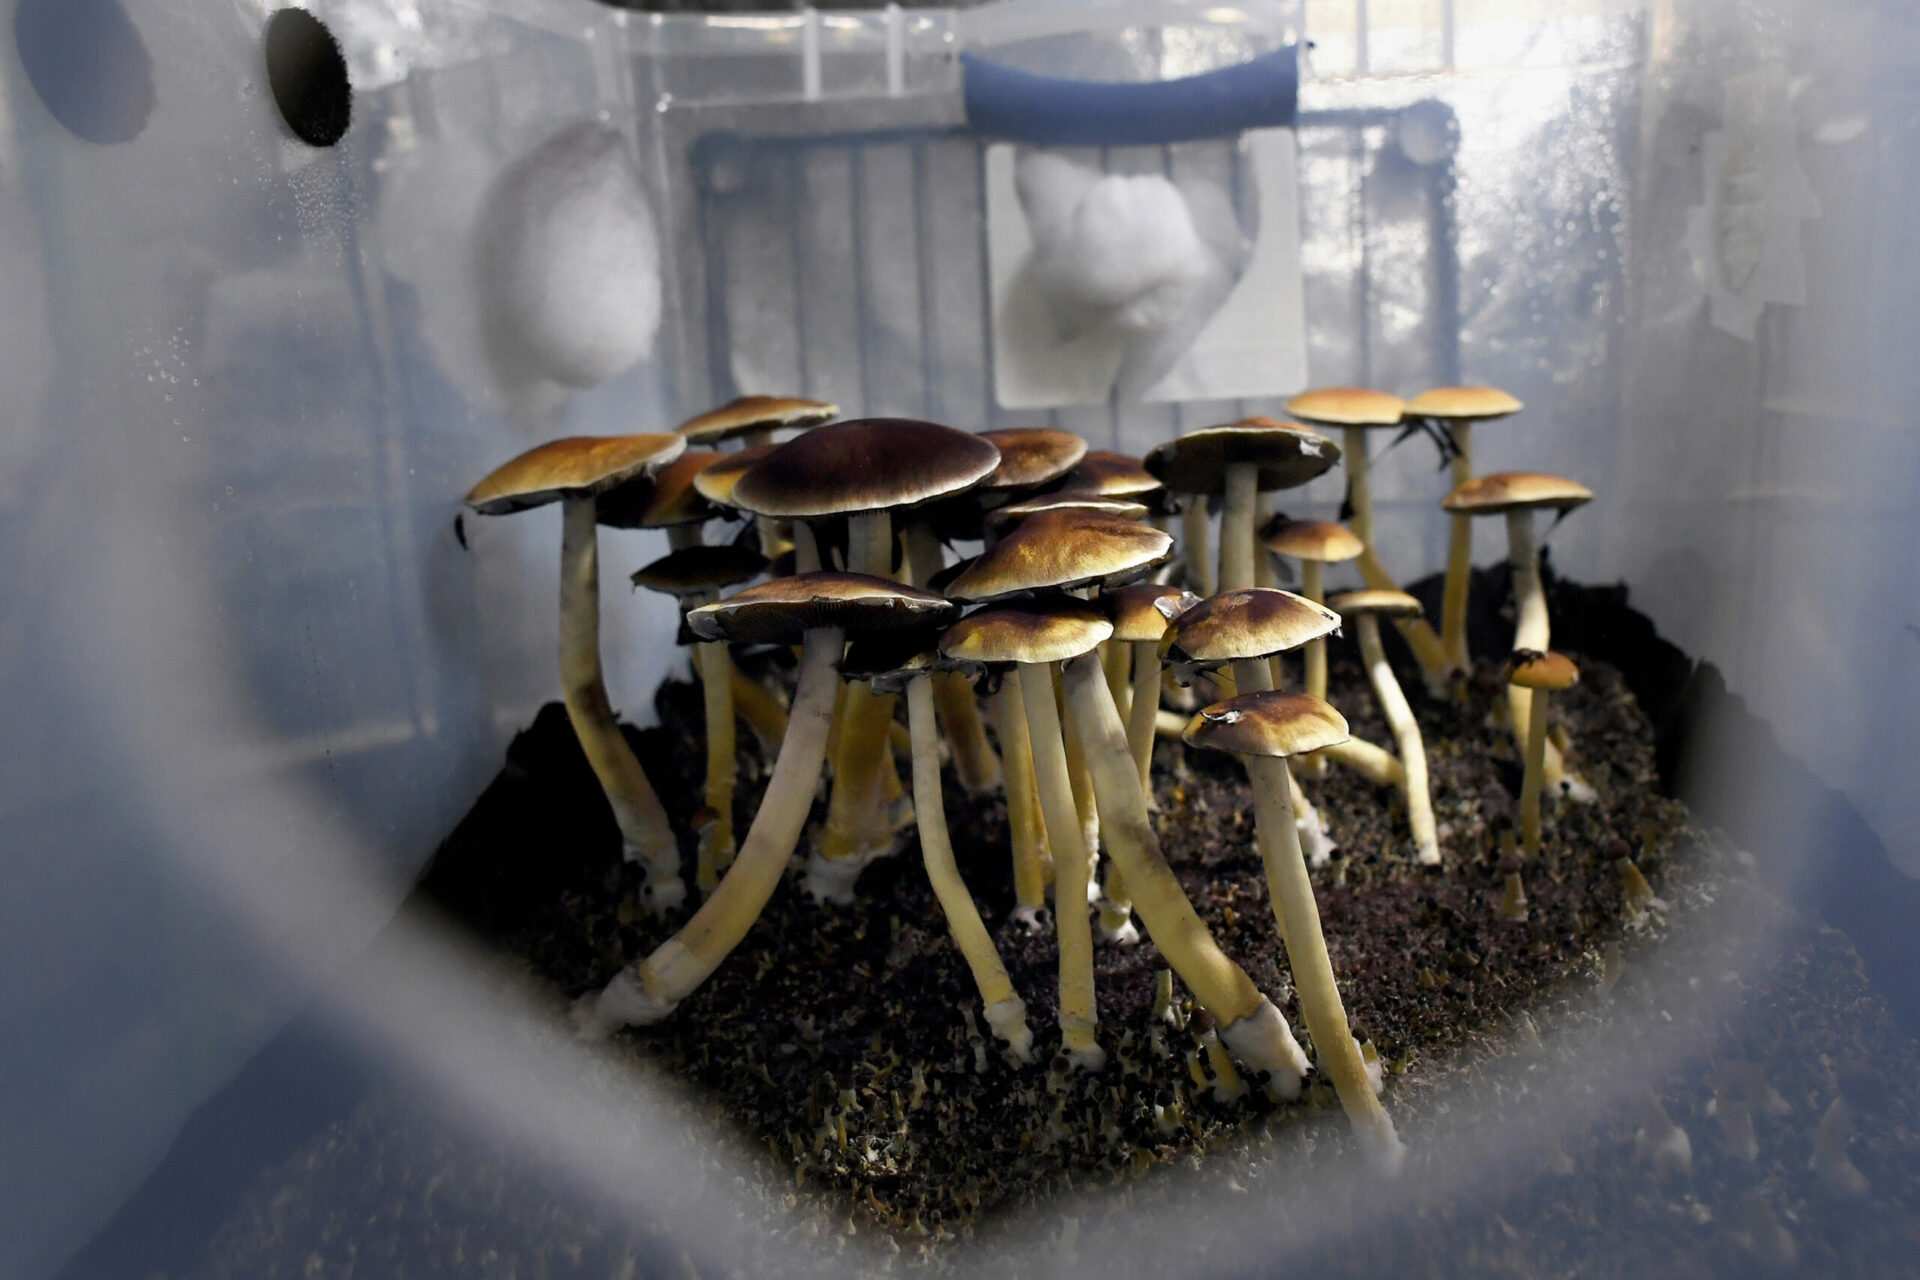 Do dying people have a 'right to try' magic mushrooms? 9th Circuit weighs case